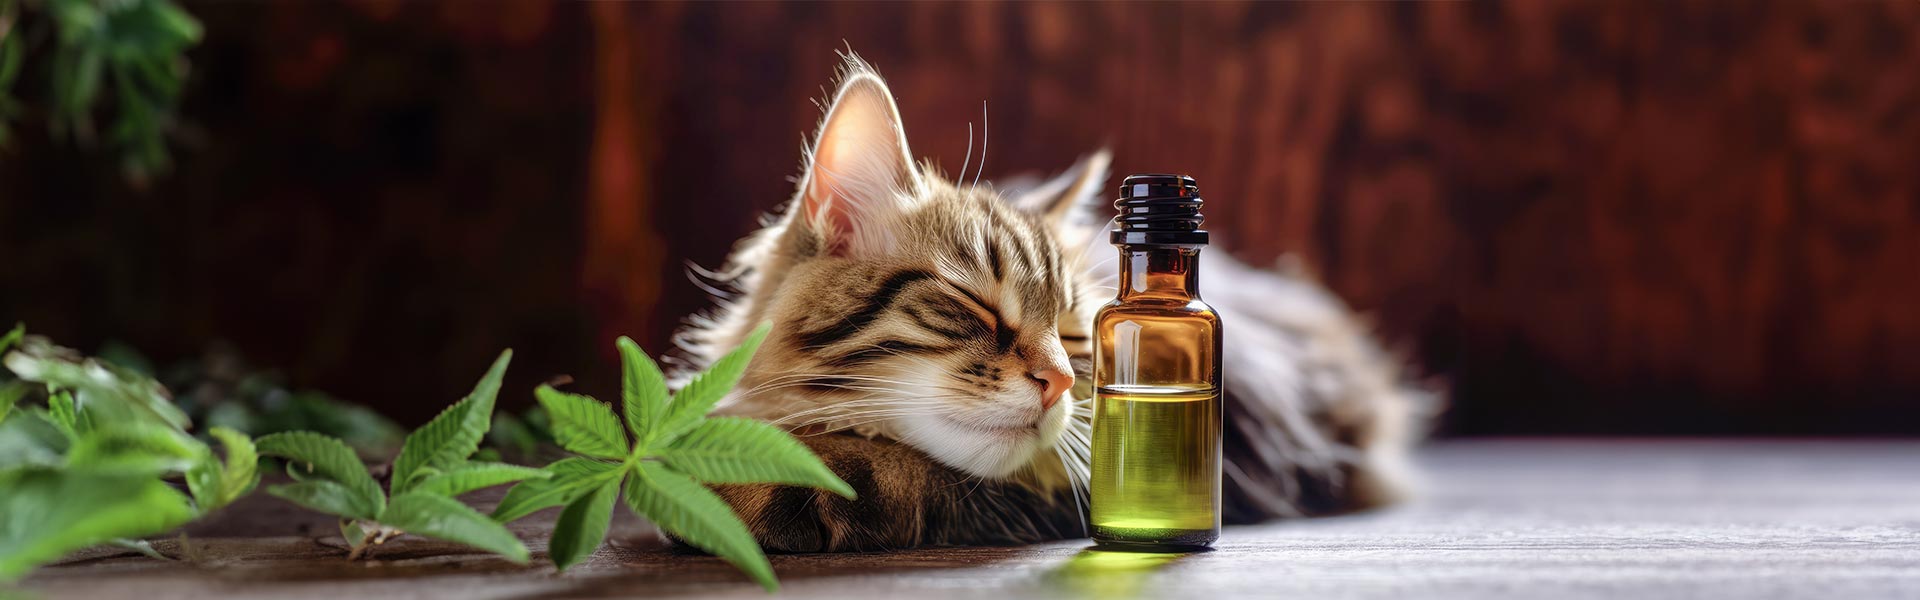 A Norwegian forest cat sleeping in front of a bottle with essential oil and some green leaves on the side